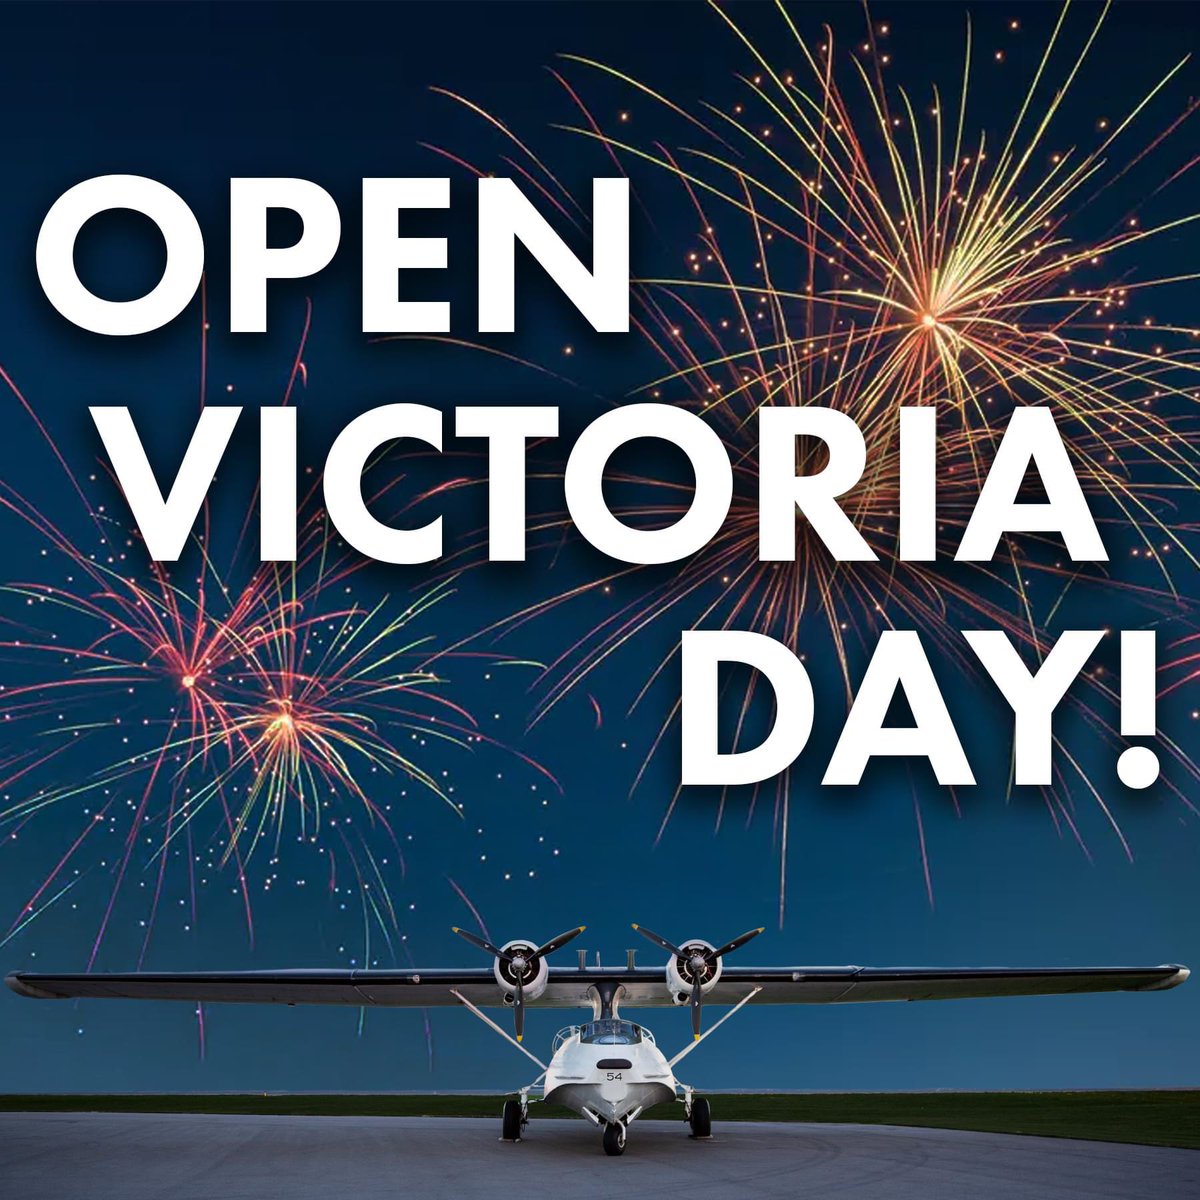 There's lots of aviation history to discover this long weekend at the museum! We are OPEN Saturday, Sunday, and Monday (Victoria Day) 9 am to 5 pm. Info at warplane.com